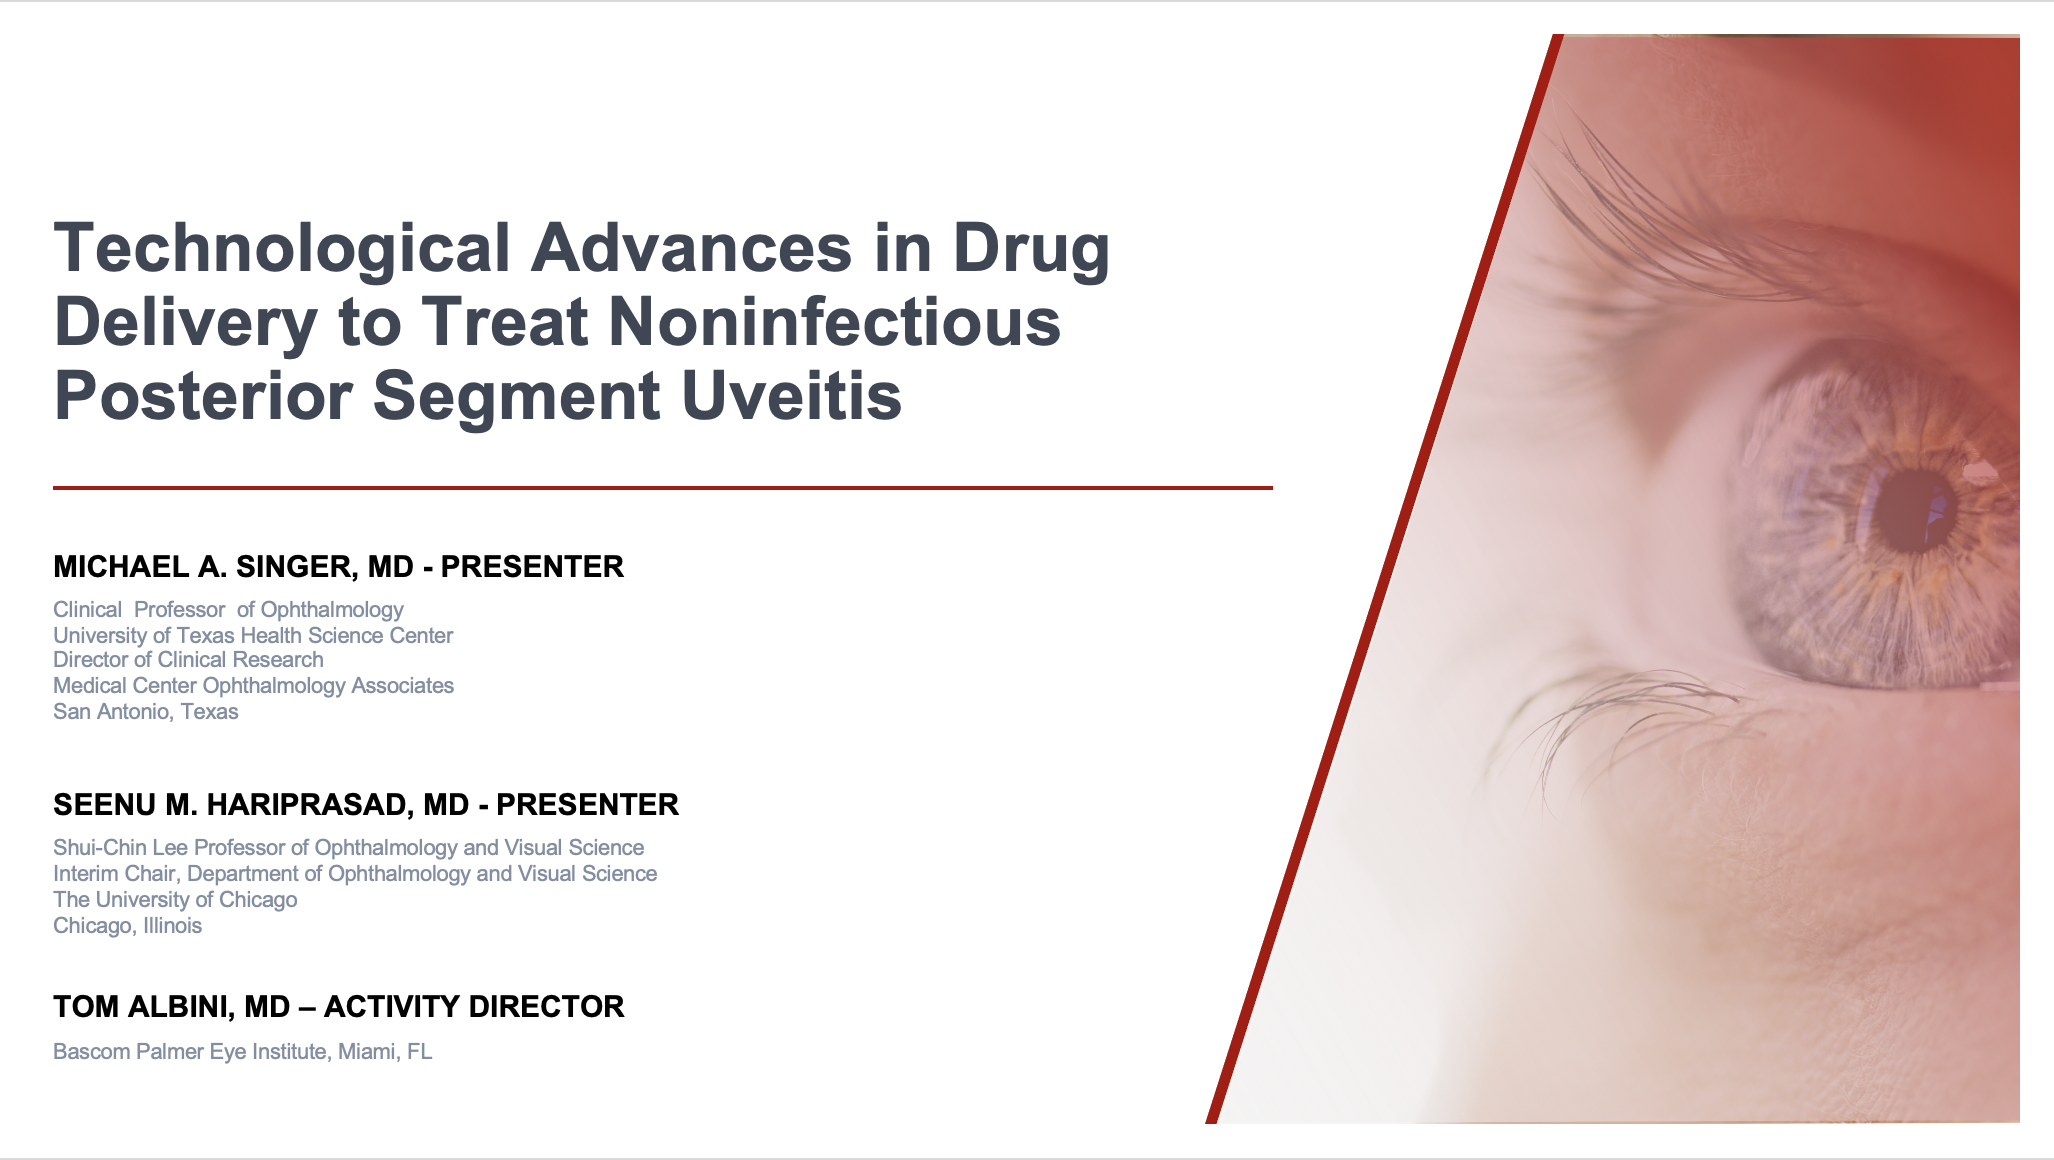 Technological Advances in Drug Delivery to Treat Noninfectious Posterior Segment Uveitis